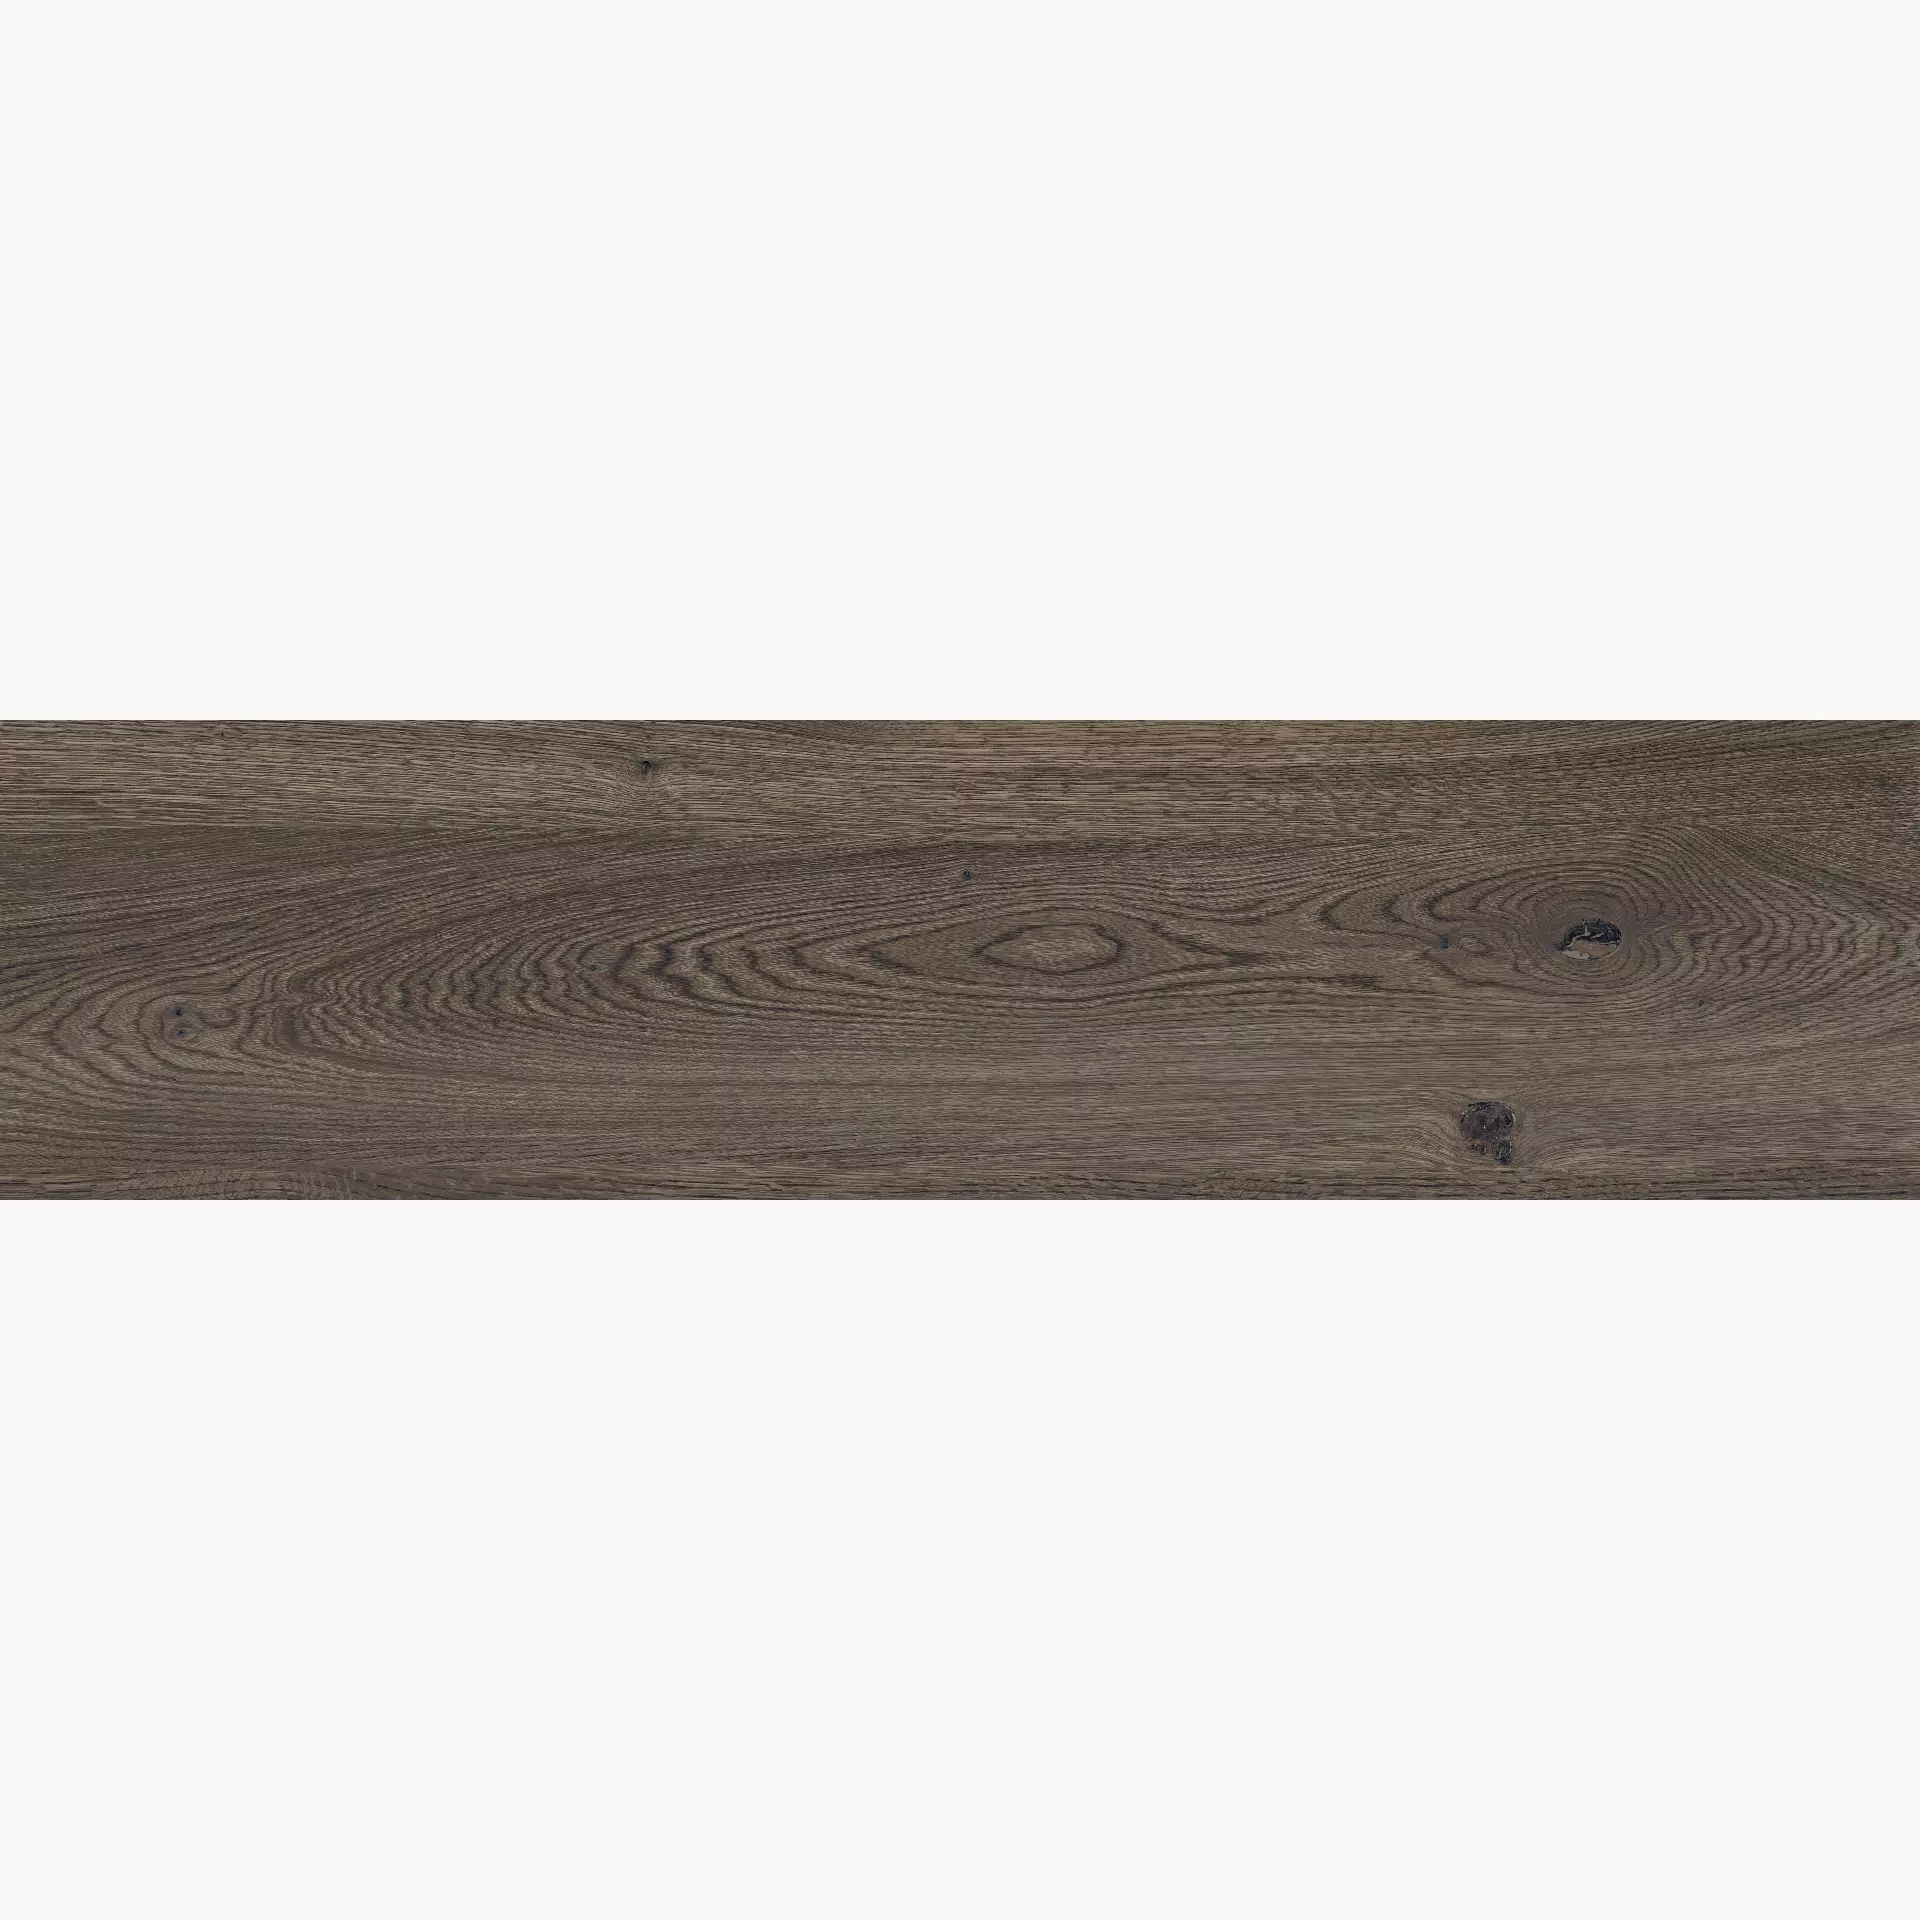 ABK Poetry Wood Mud Naturale PF60010339 30x120cm rectified 8,5mm